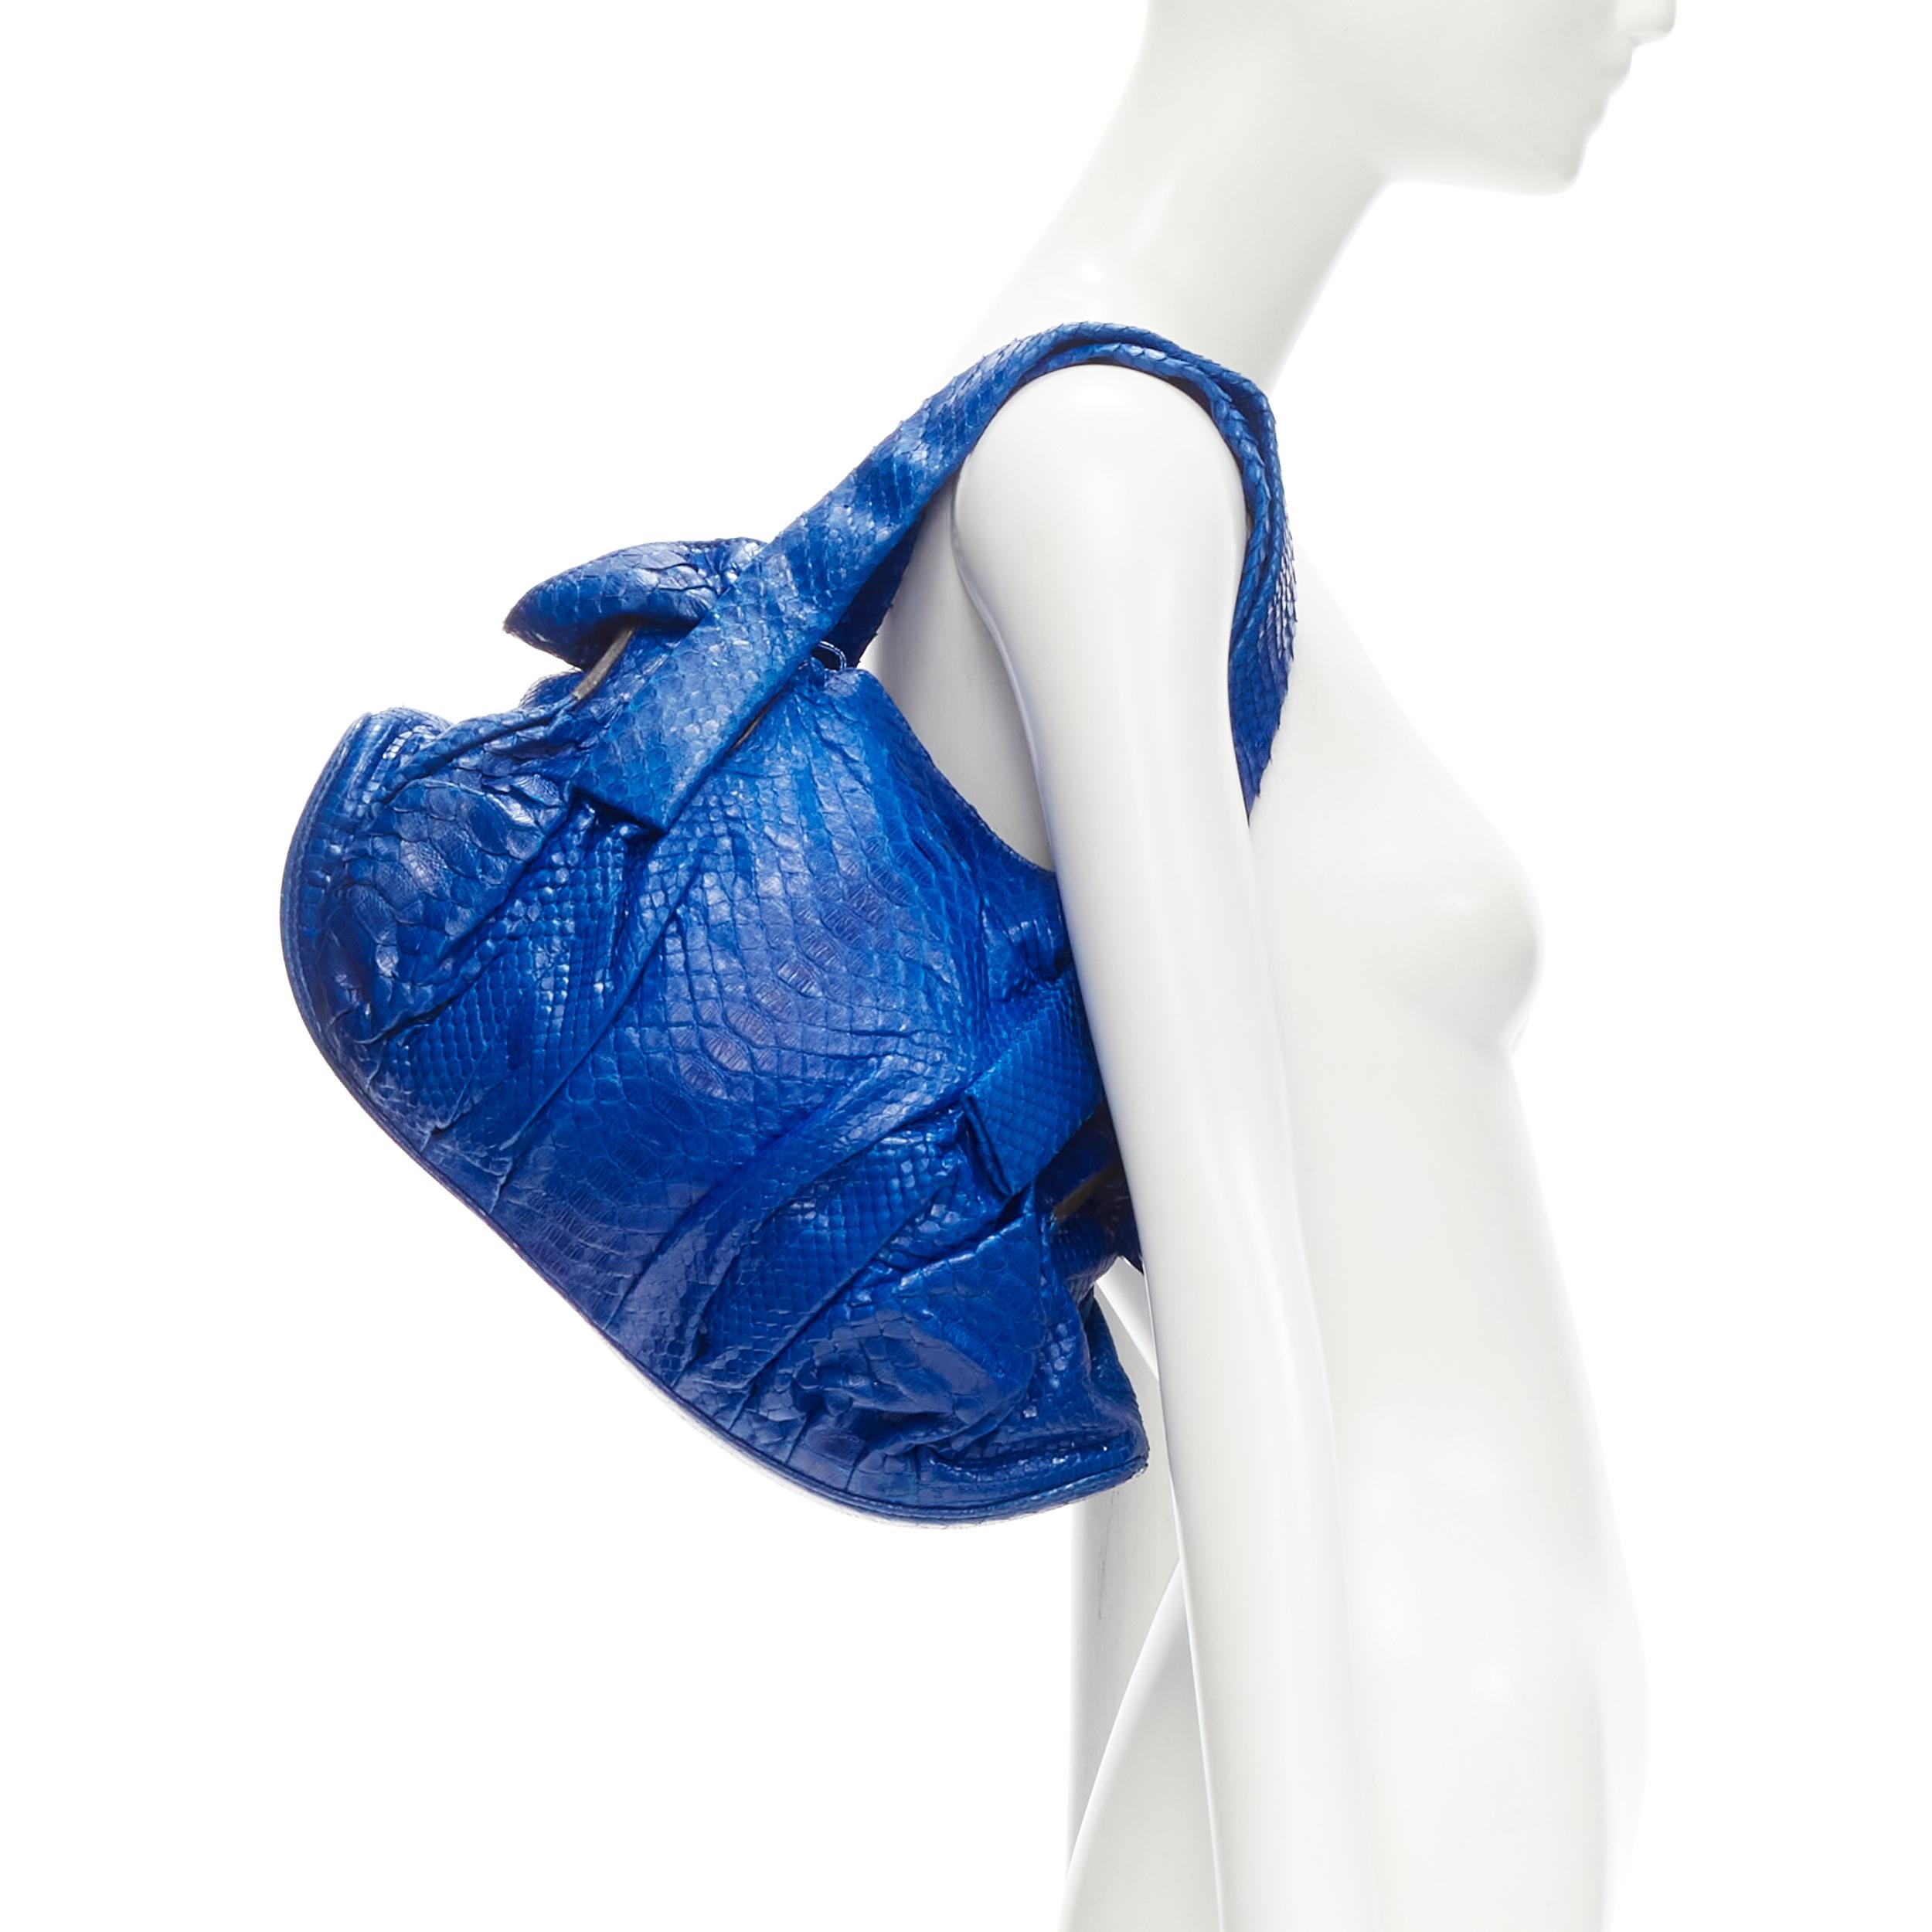 ZAGLIANI cobalt blue scaled leather dumpling top handle bag
Brand: Zagliani
Extra Detail: Soft unstructured scaled leather. Gathered side. Curved base dumpling shaped. Magnetic opening. Wall zip compartment and phone pocket at